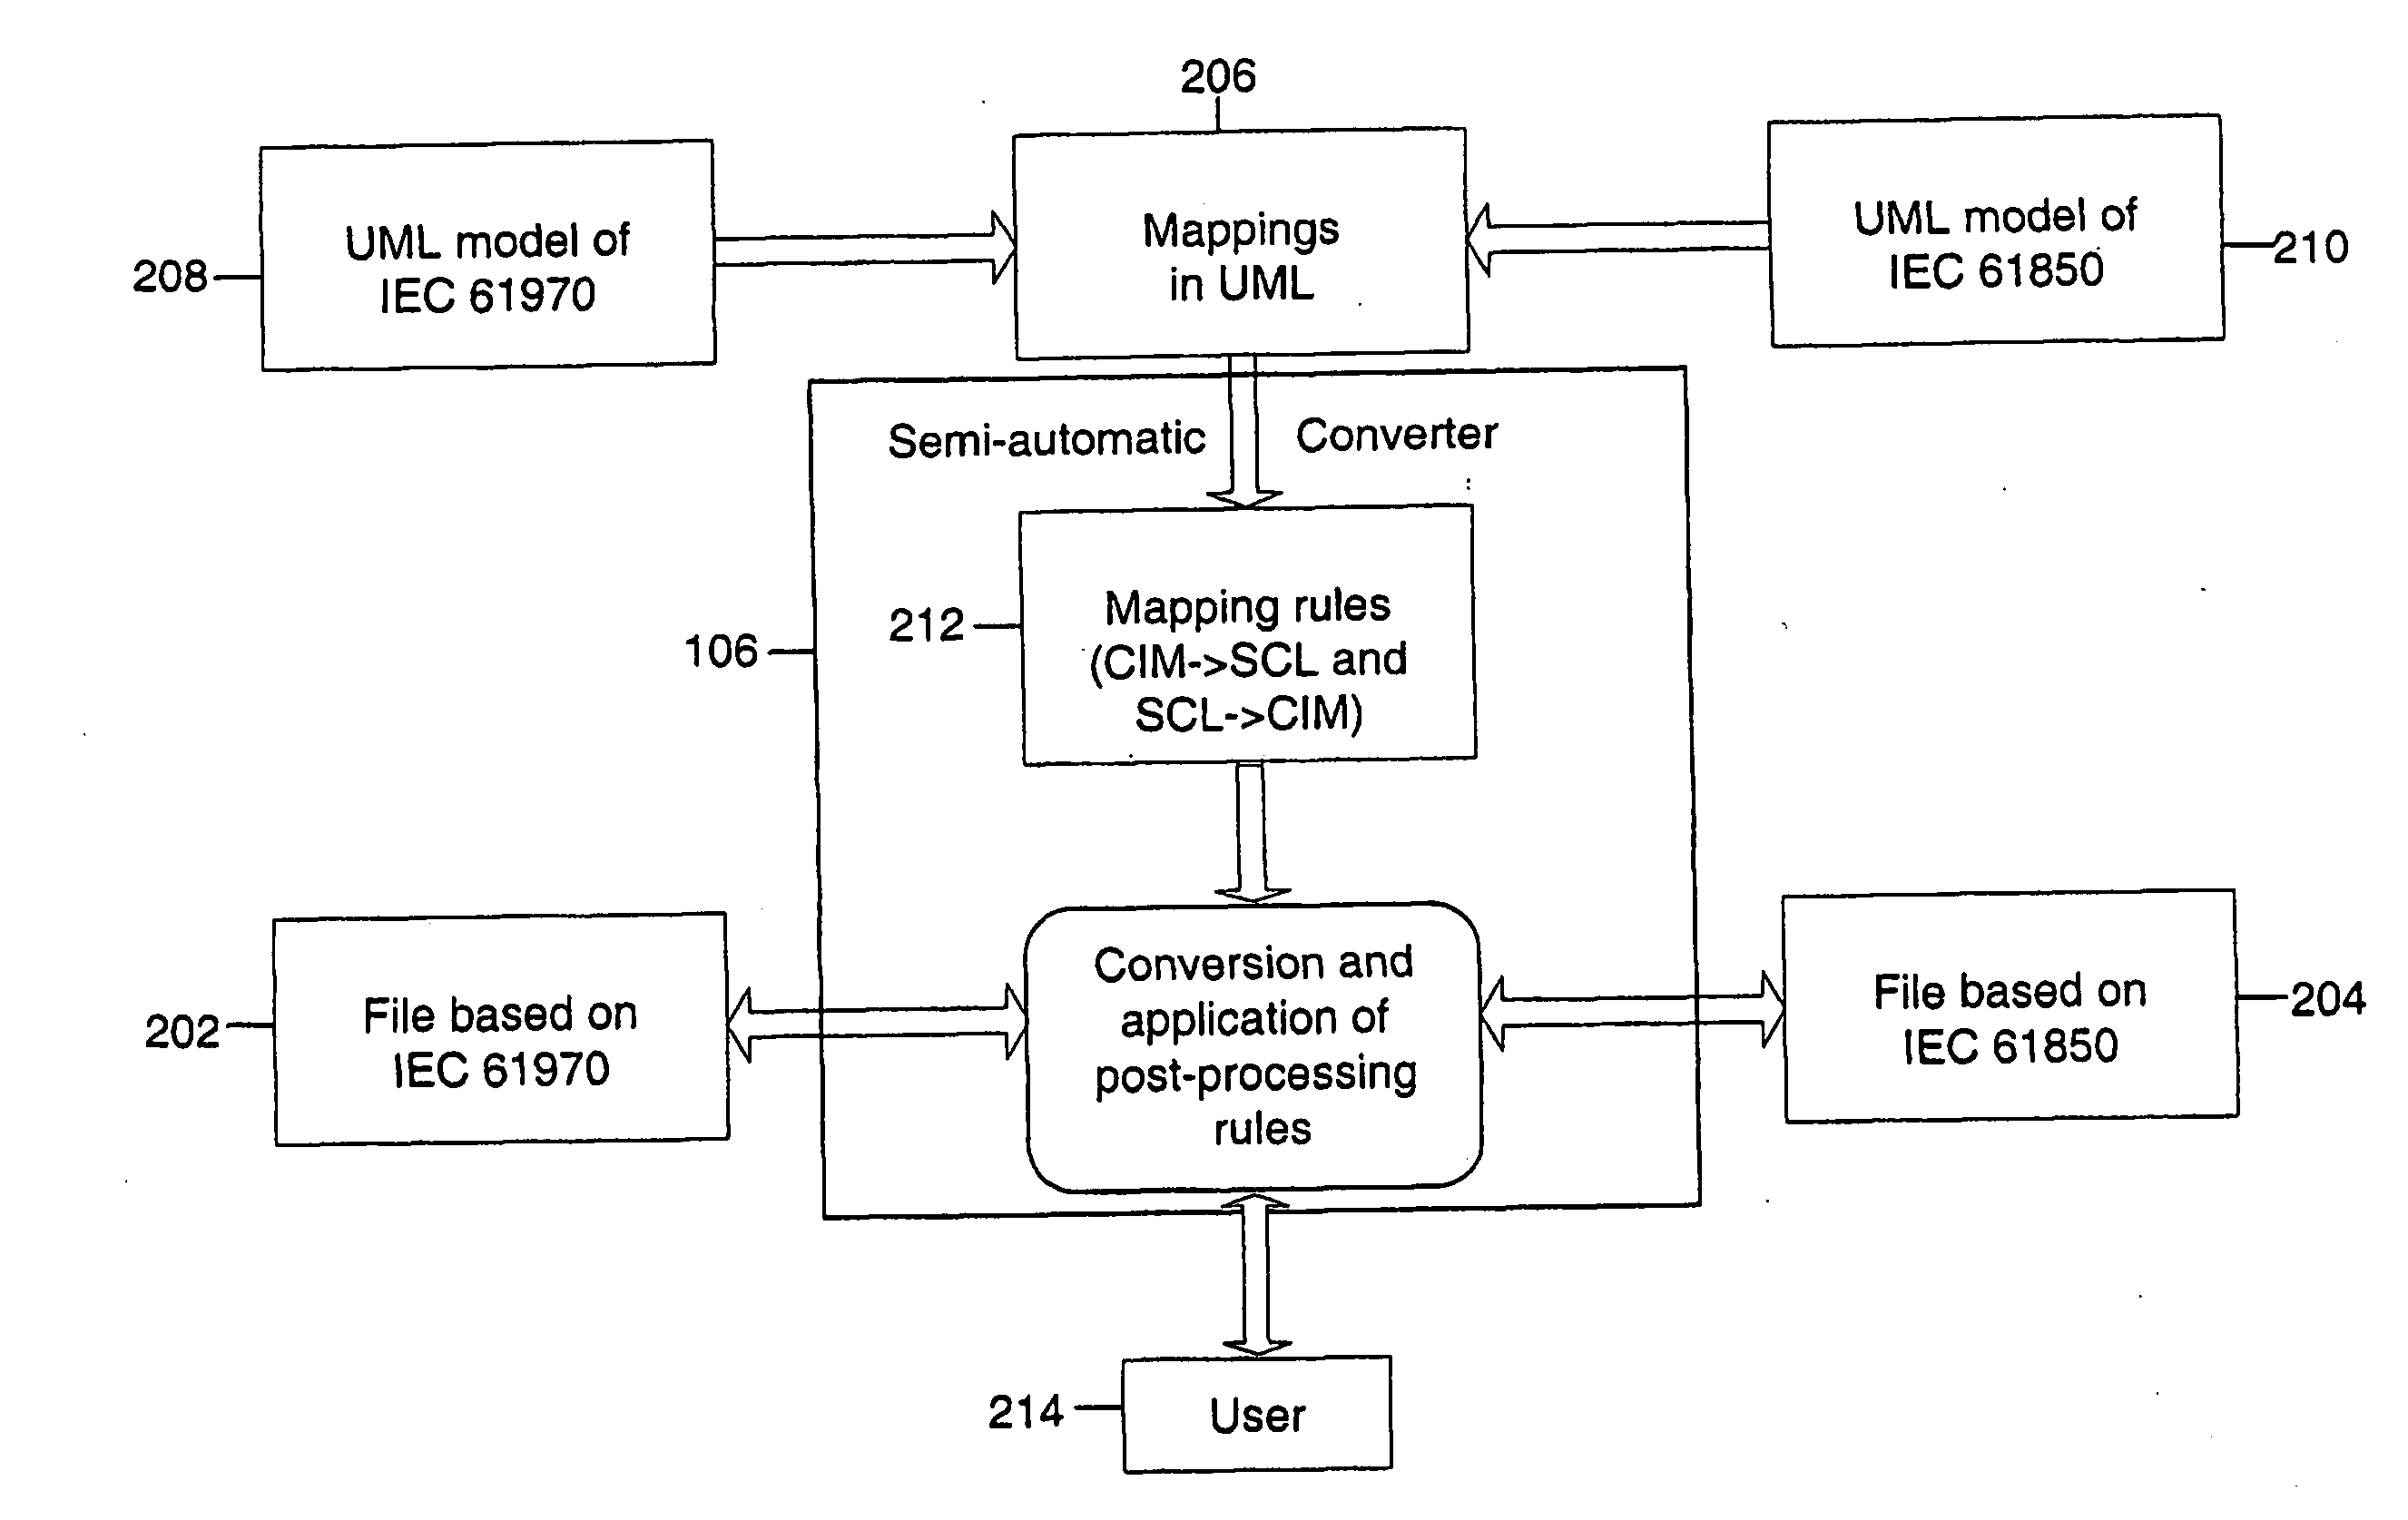 Method and system for bi-directional data conversion between IEC 61970 and IEC 61850